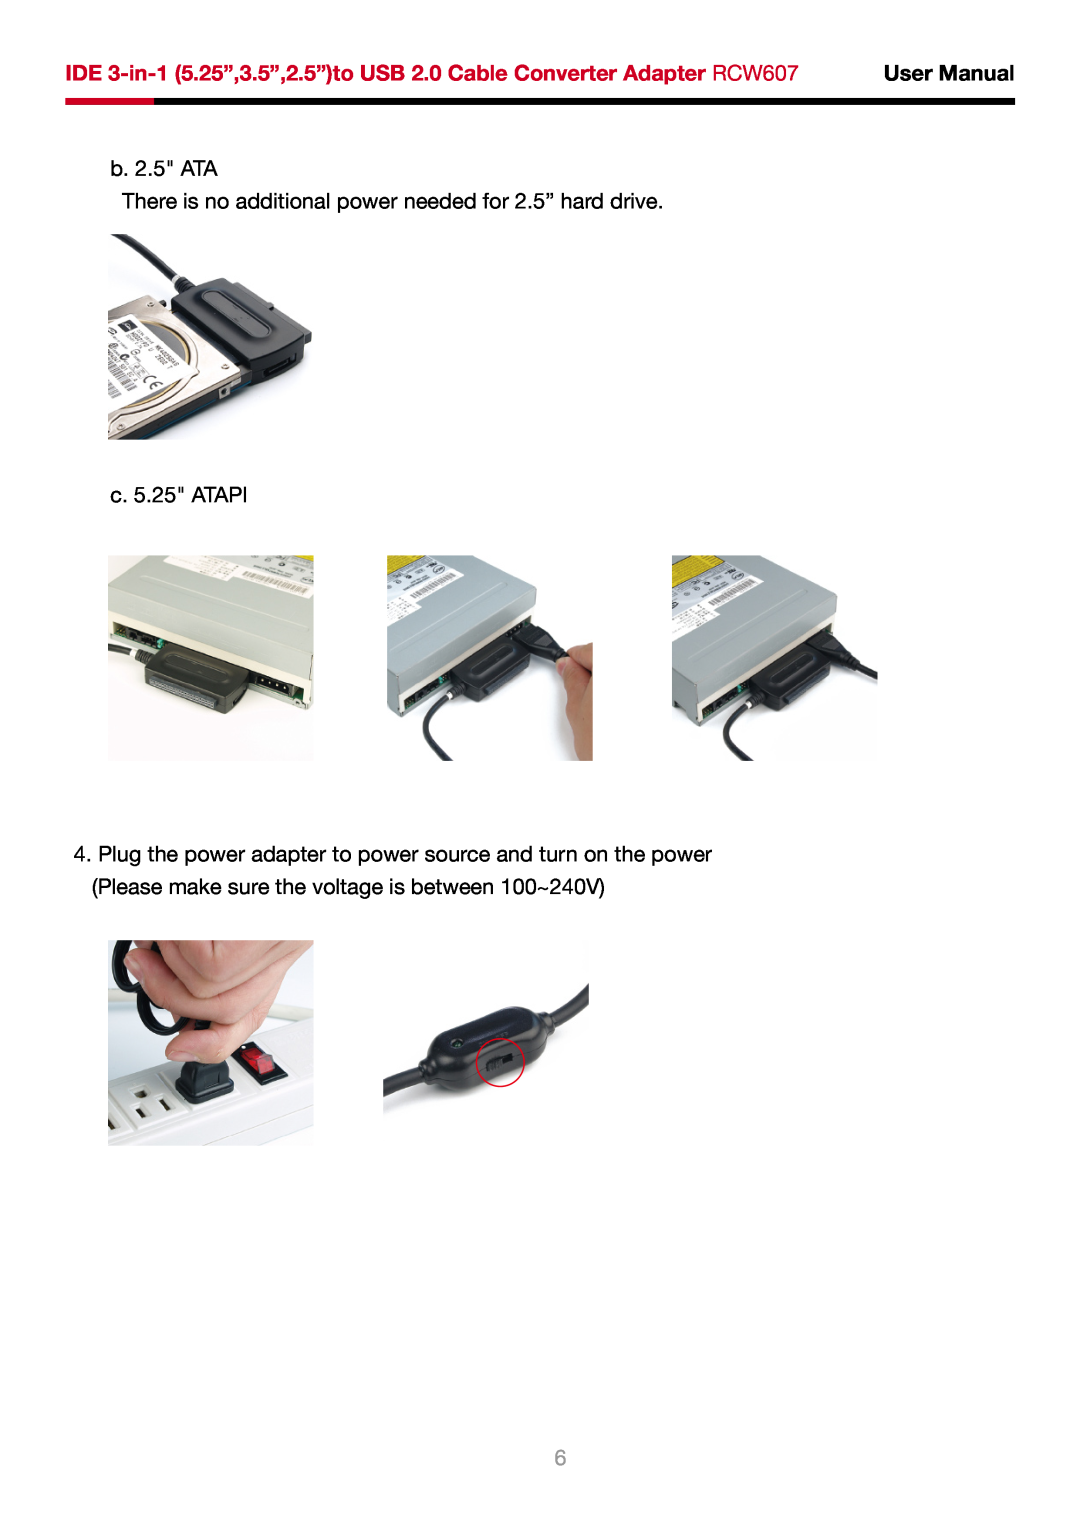 Rosewill user manual IDE 3-in-1 5.25”,3.5”,2.5”to USB 2.0 Cable Converter Adapter RCW607, c. 5.25 ATAPI 